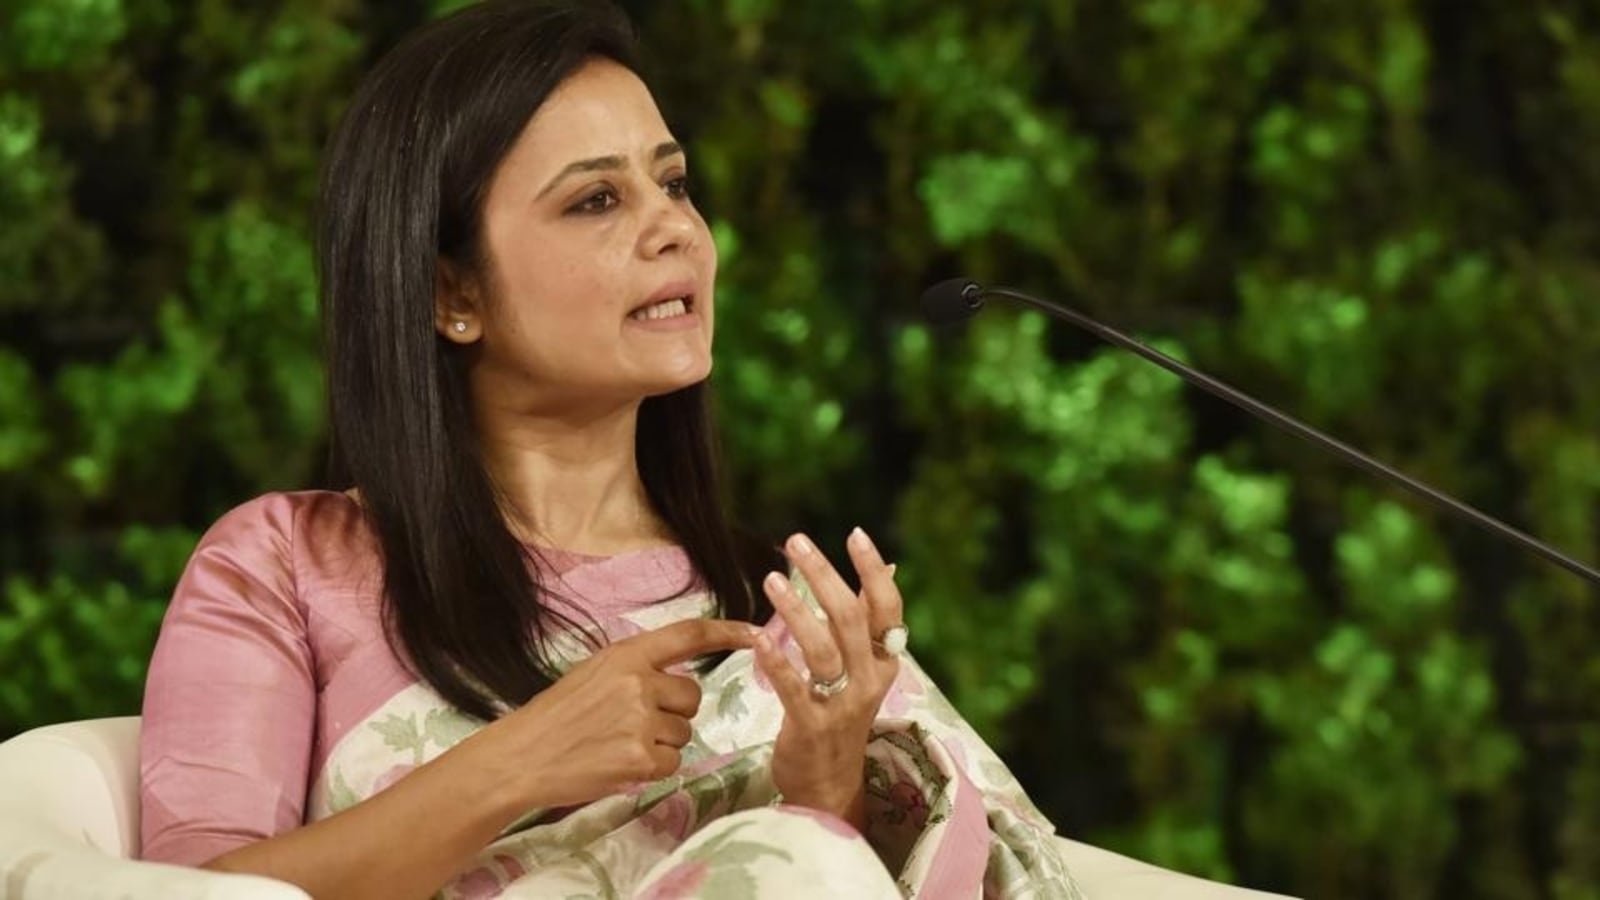 Mahua Moitra TMC Leader Profile: A Banker's Guide To Winning